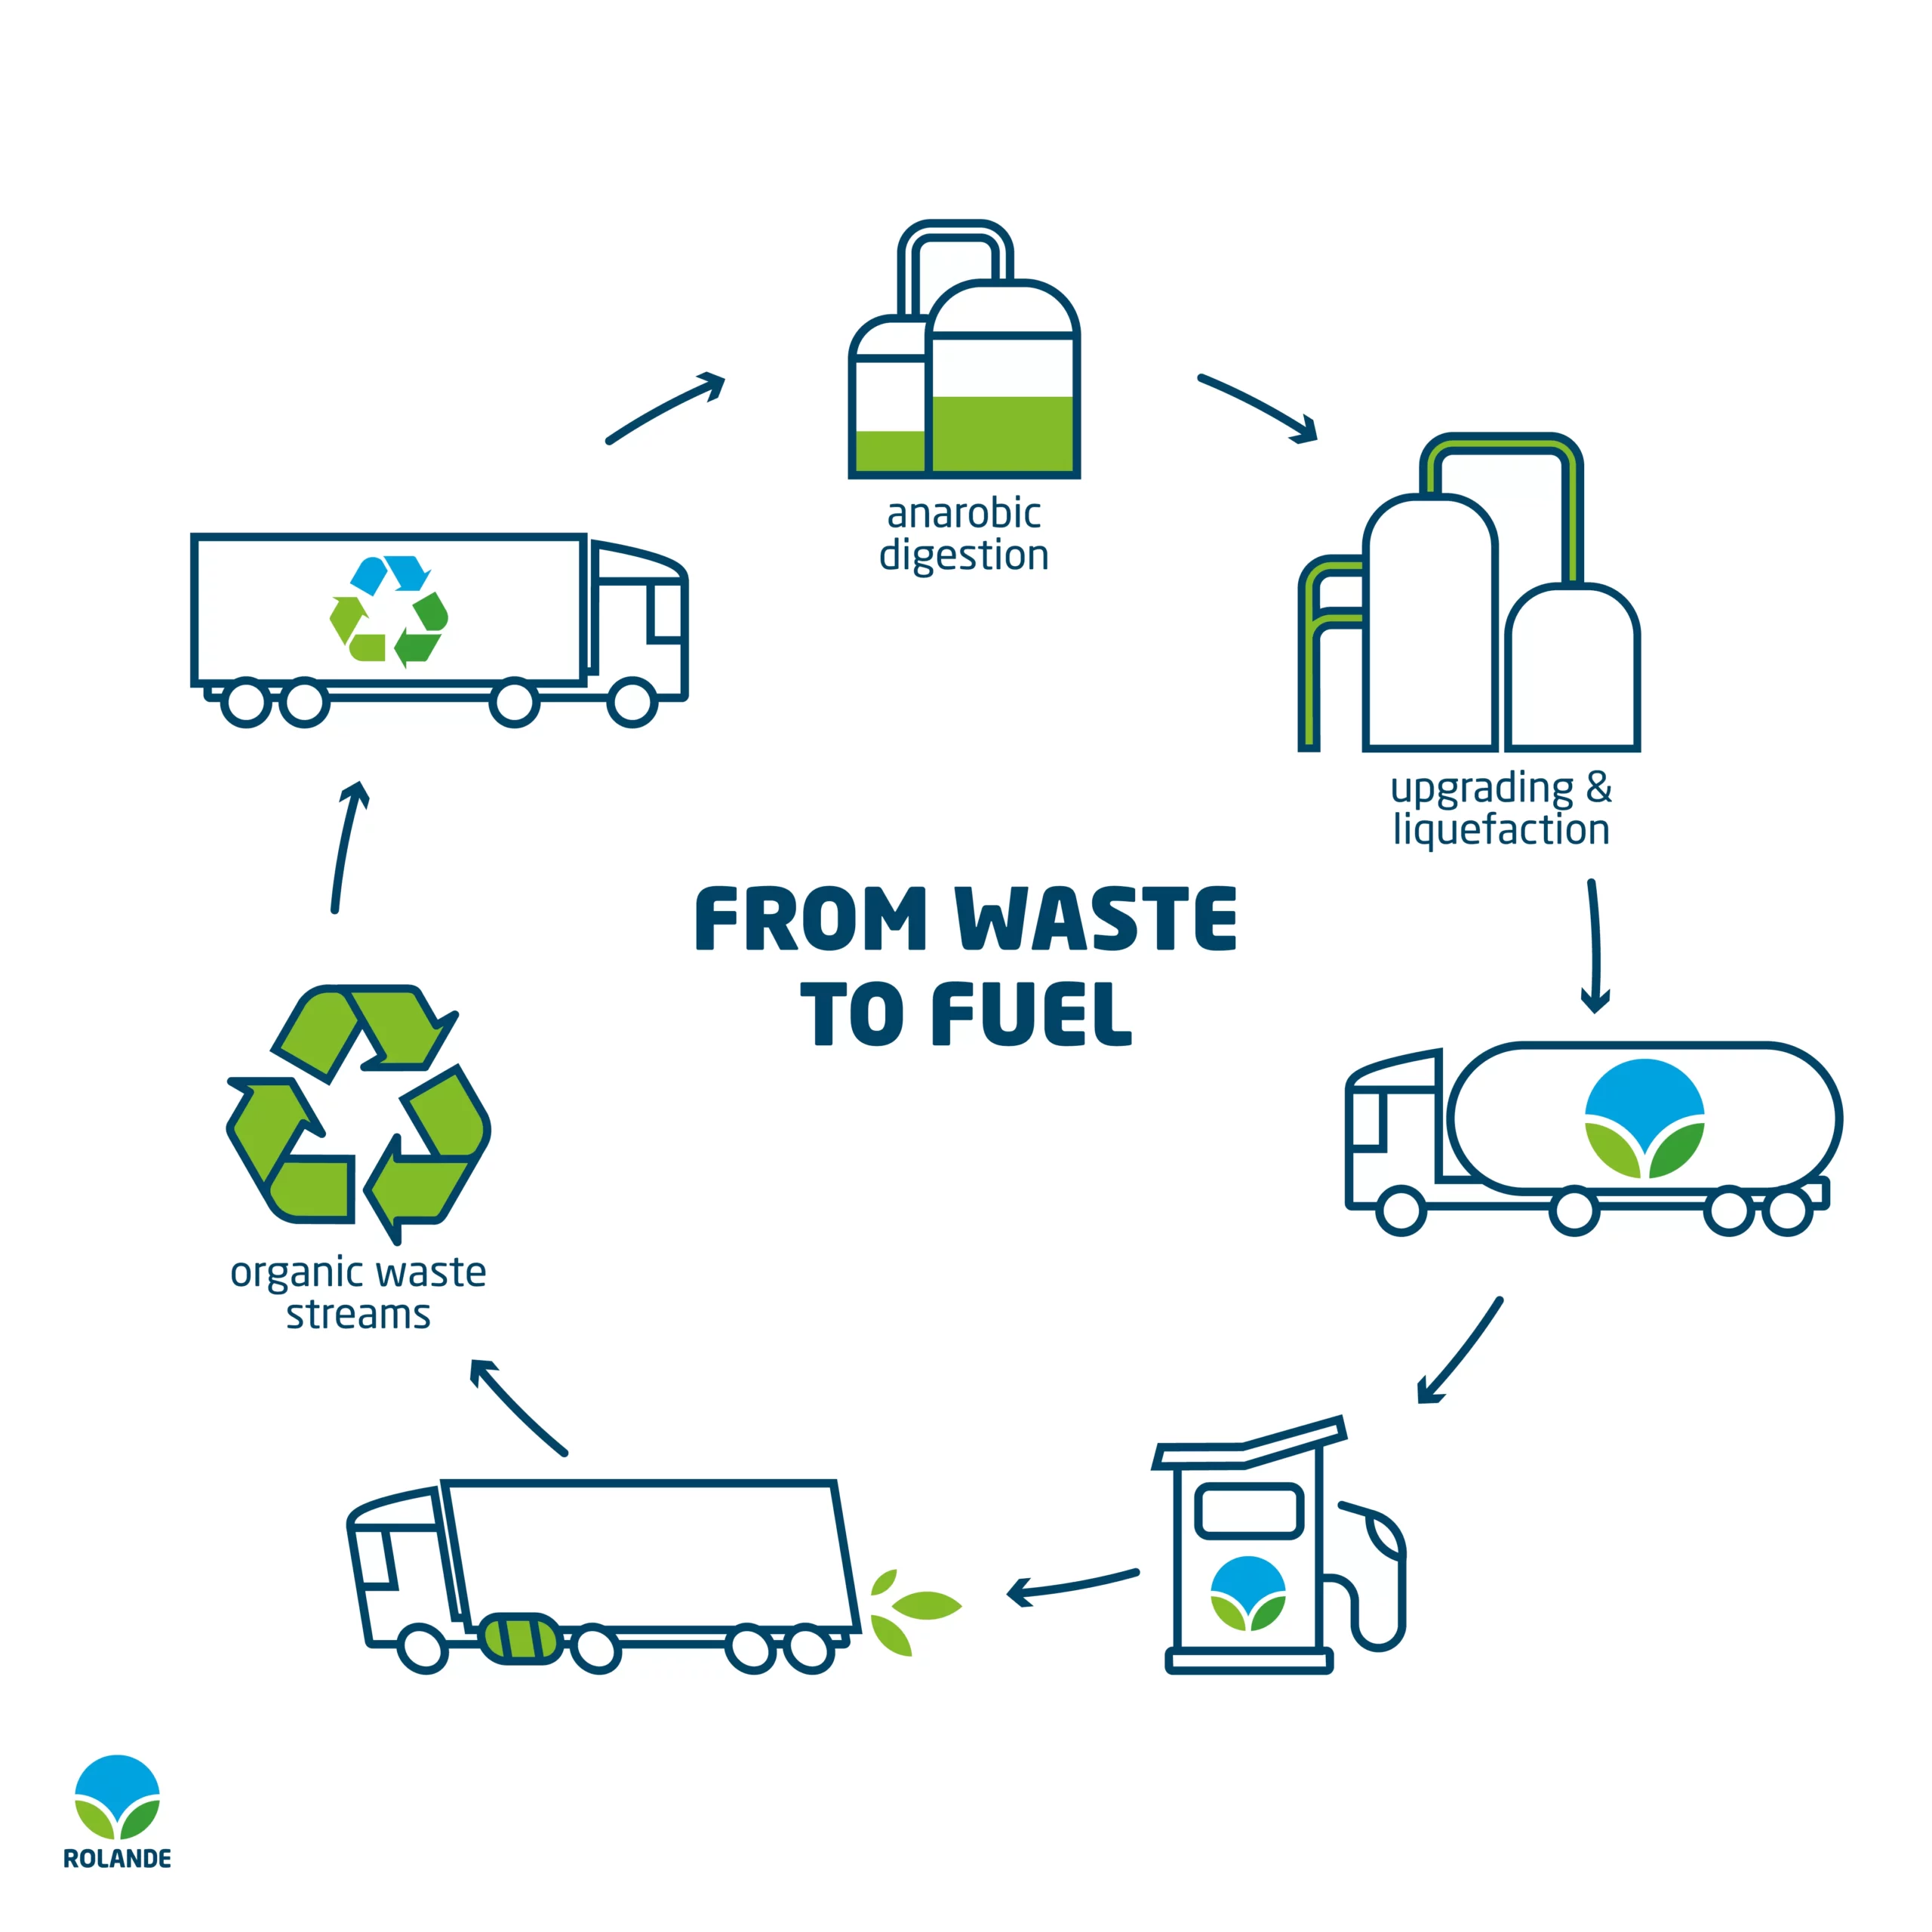 From waste to fuel